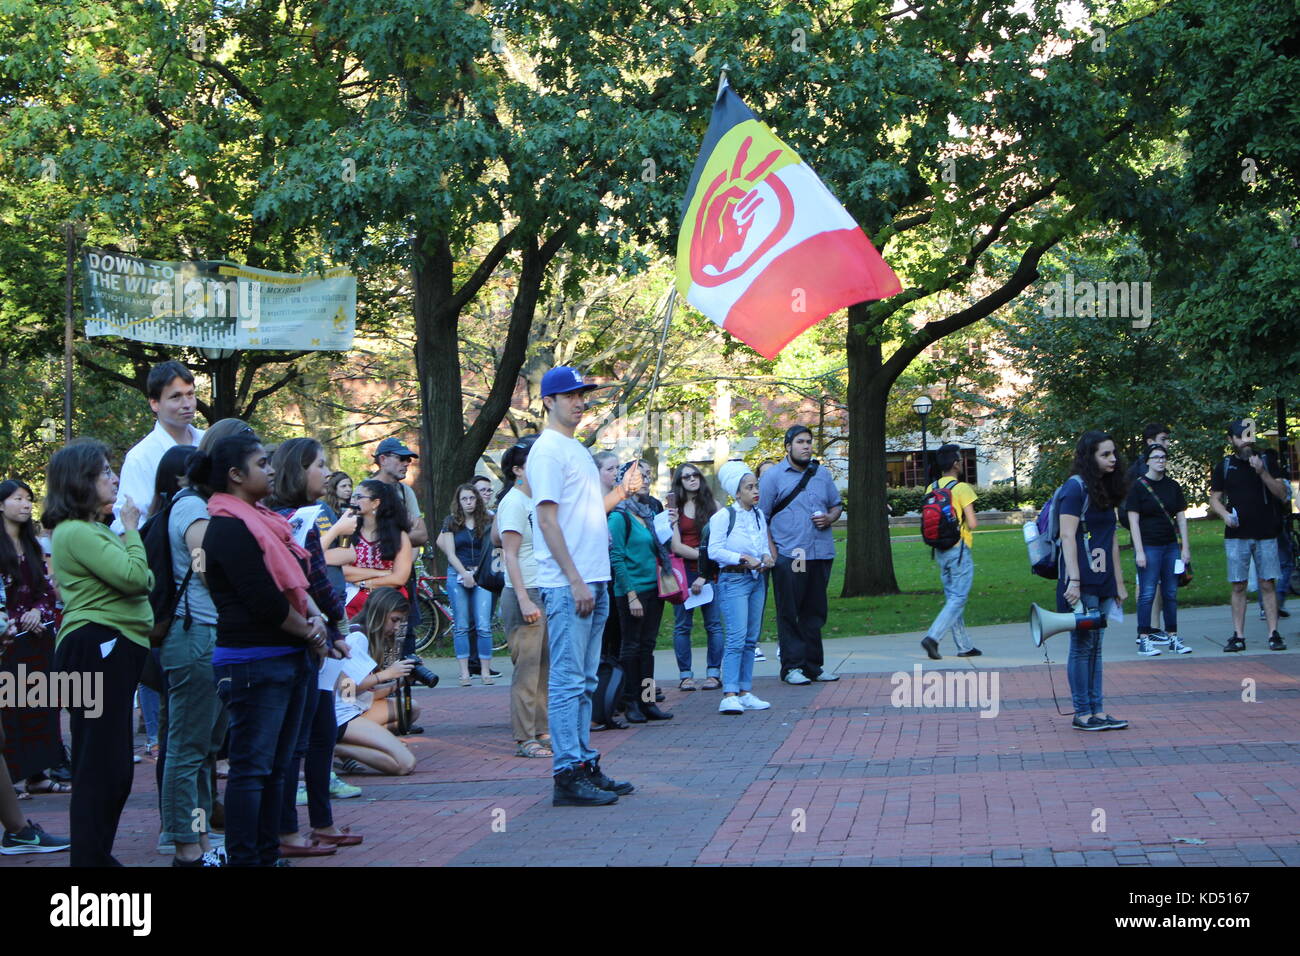 A protest in downtown Ann Arbor about hate, native americans, and Columbus Day Stock Photo